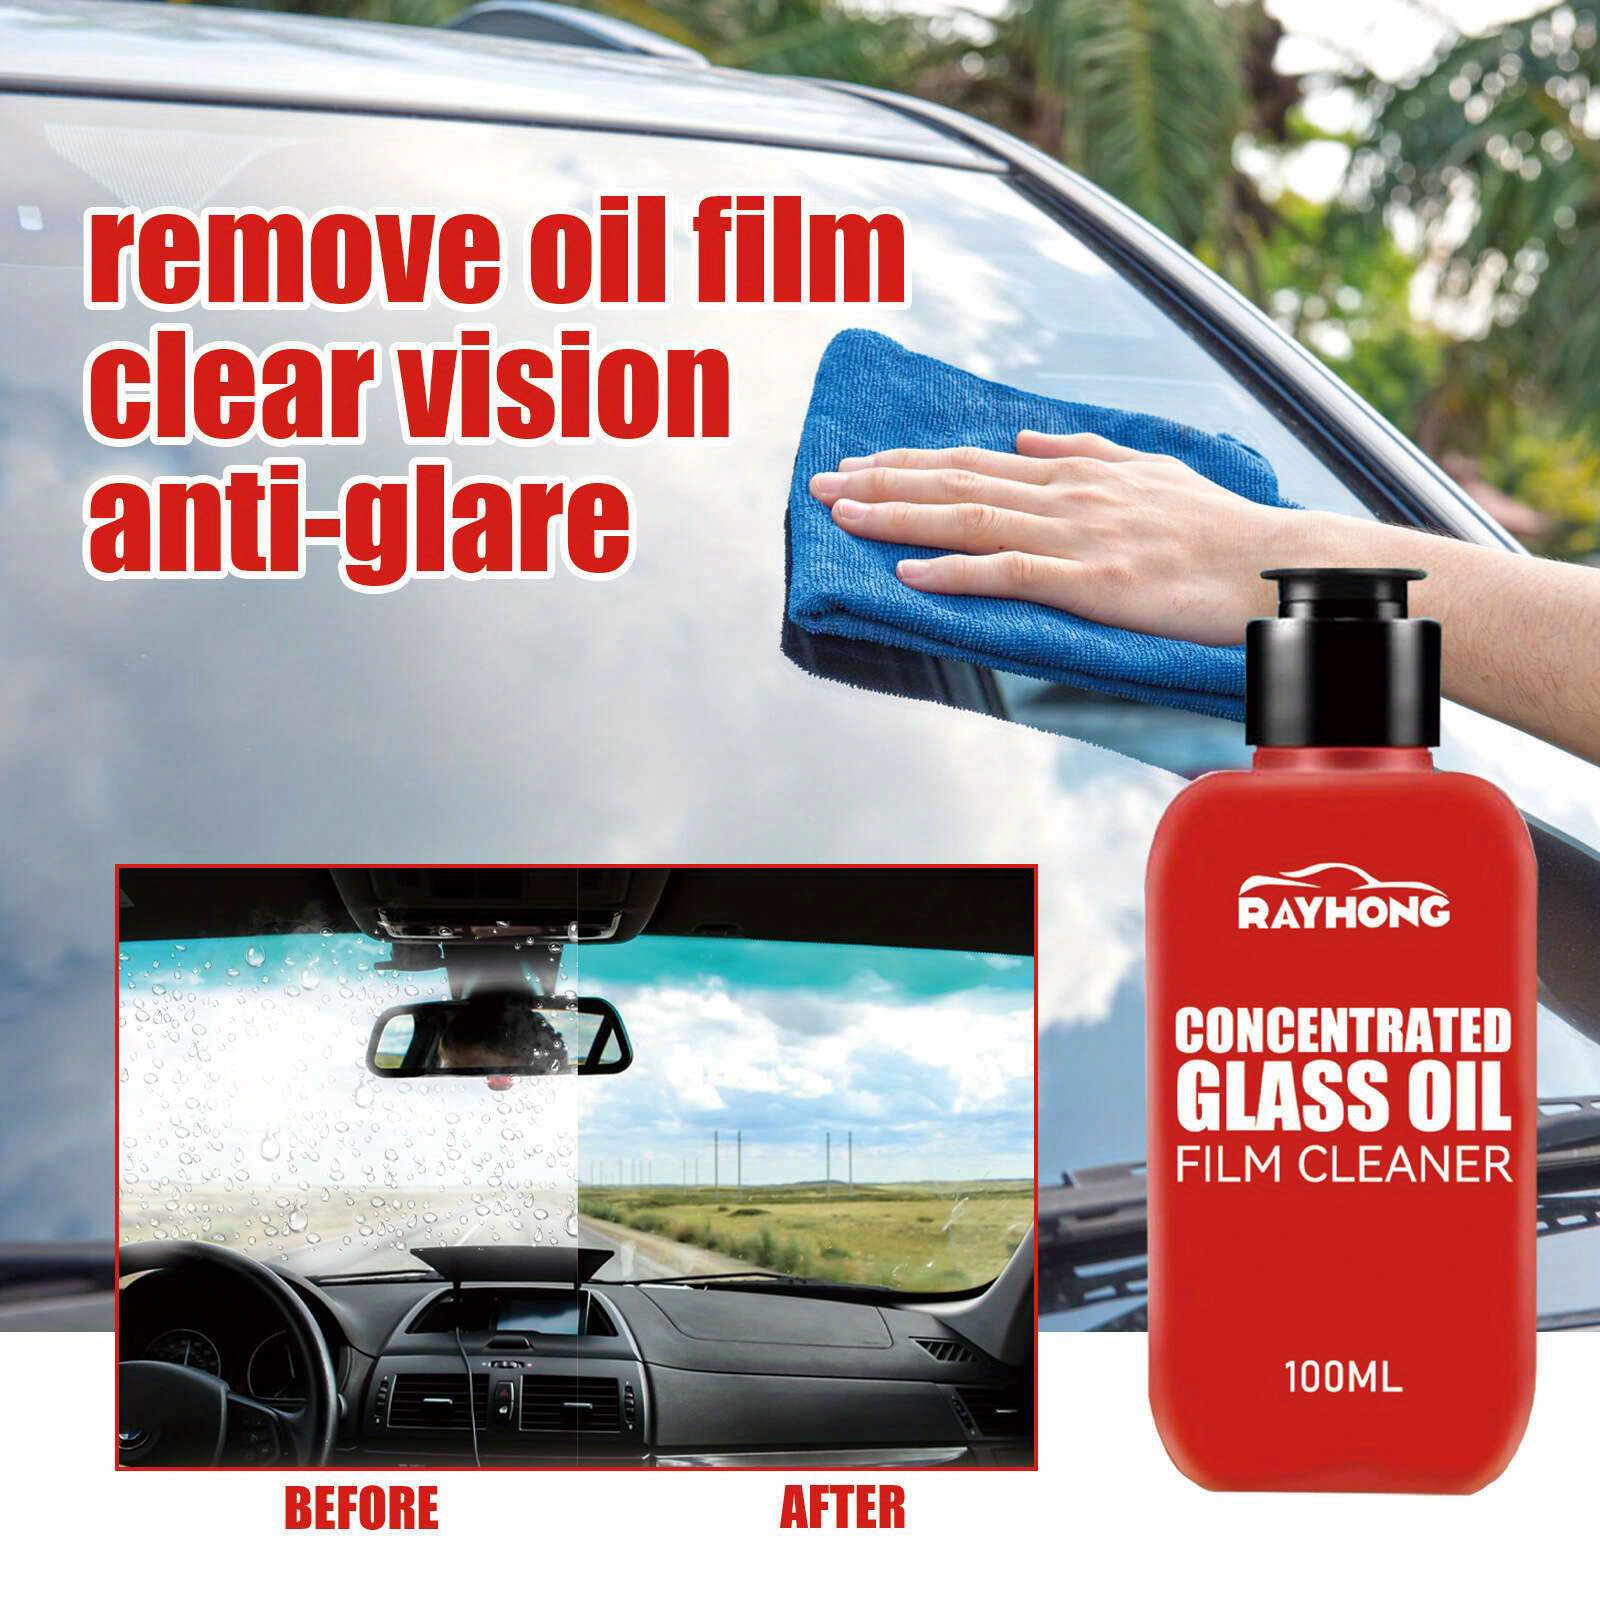 Car Glass Oil Film Stain Removal Cleaner, Car Windshield Oil Film Cleaner